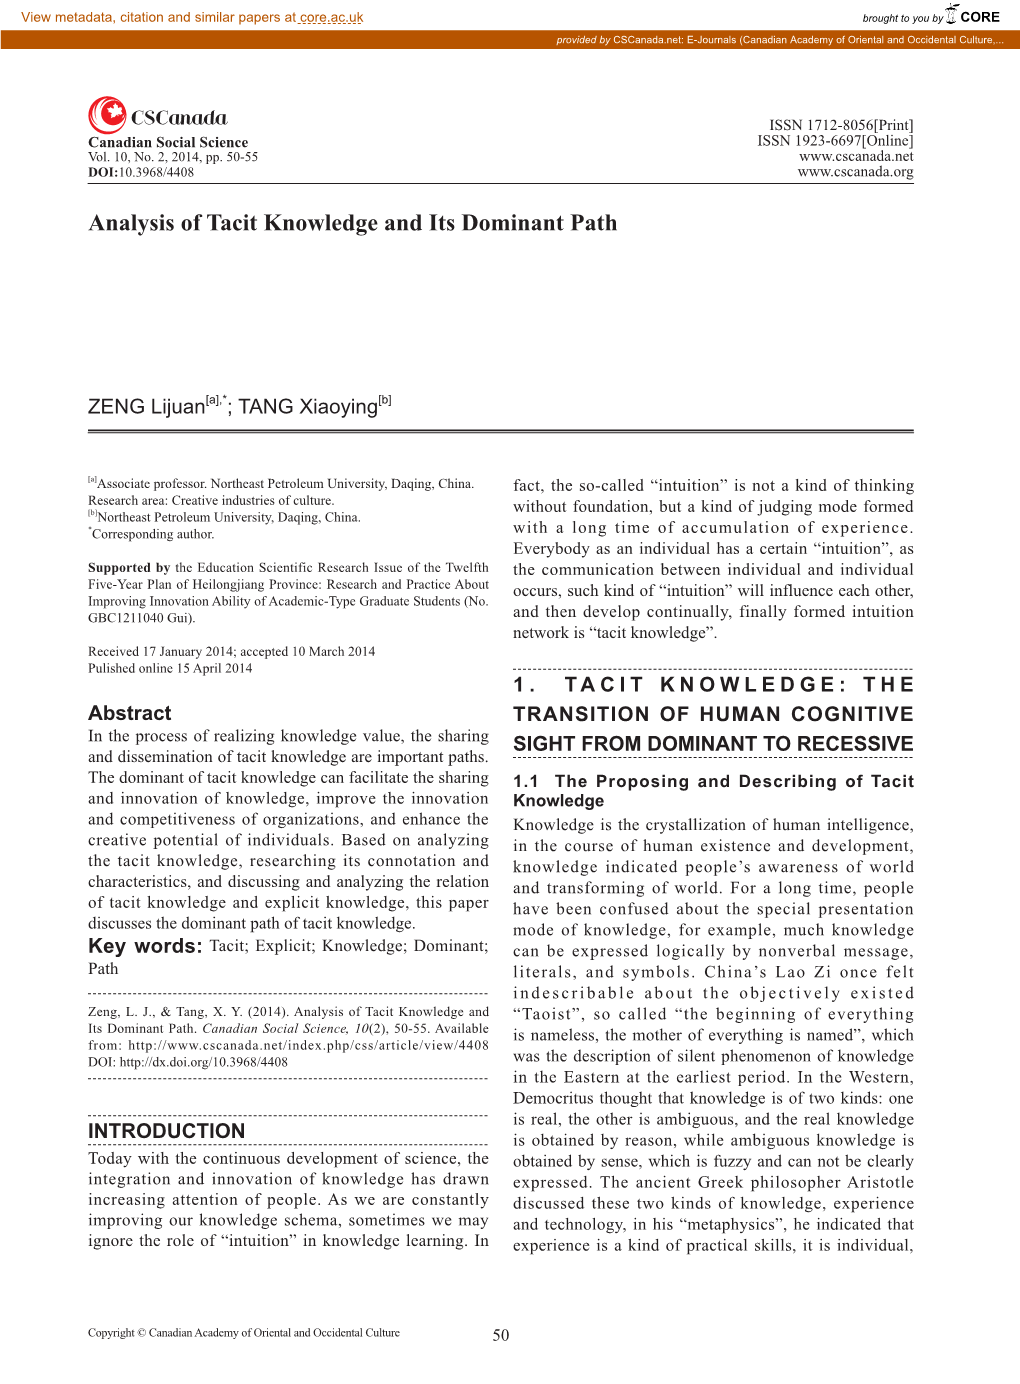 Analysis of Tacit Knowledge and Its Dominant Path